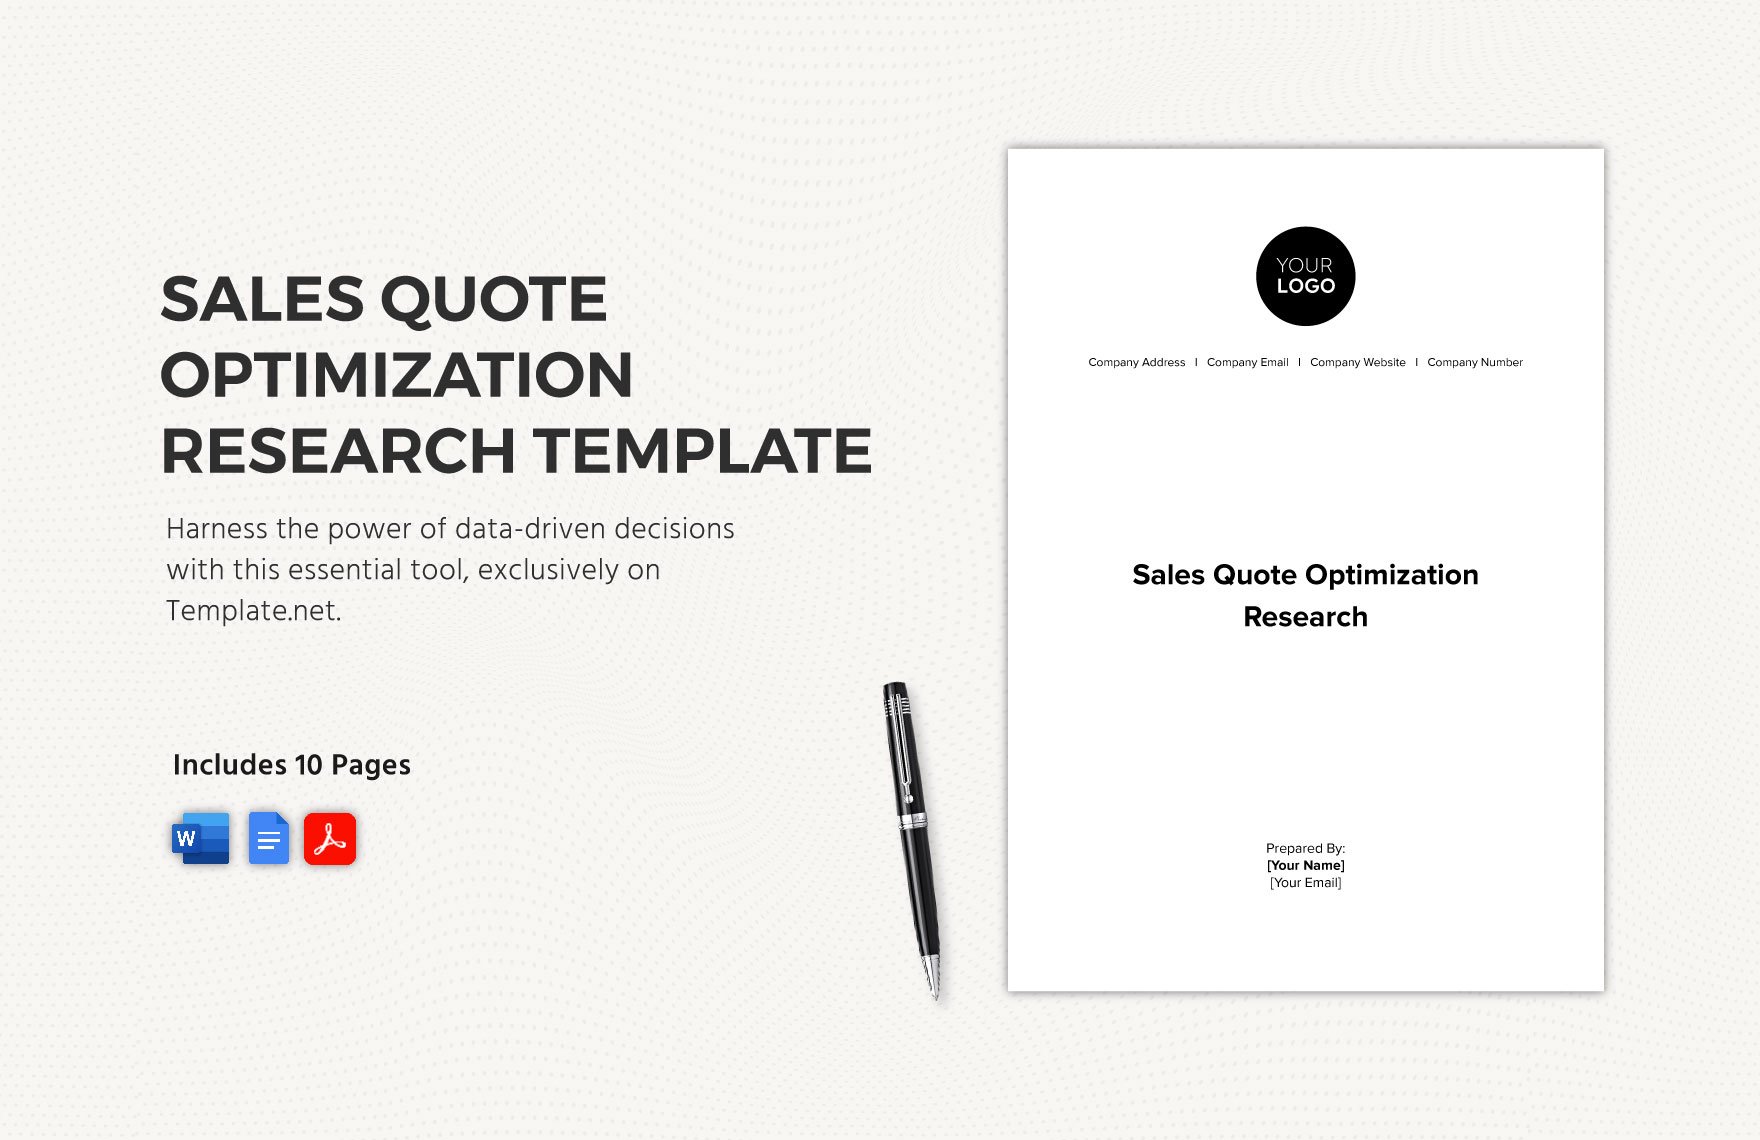 Sales Quote Optimization Research Template